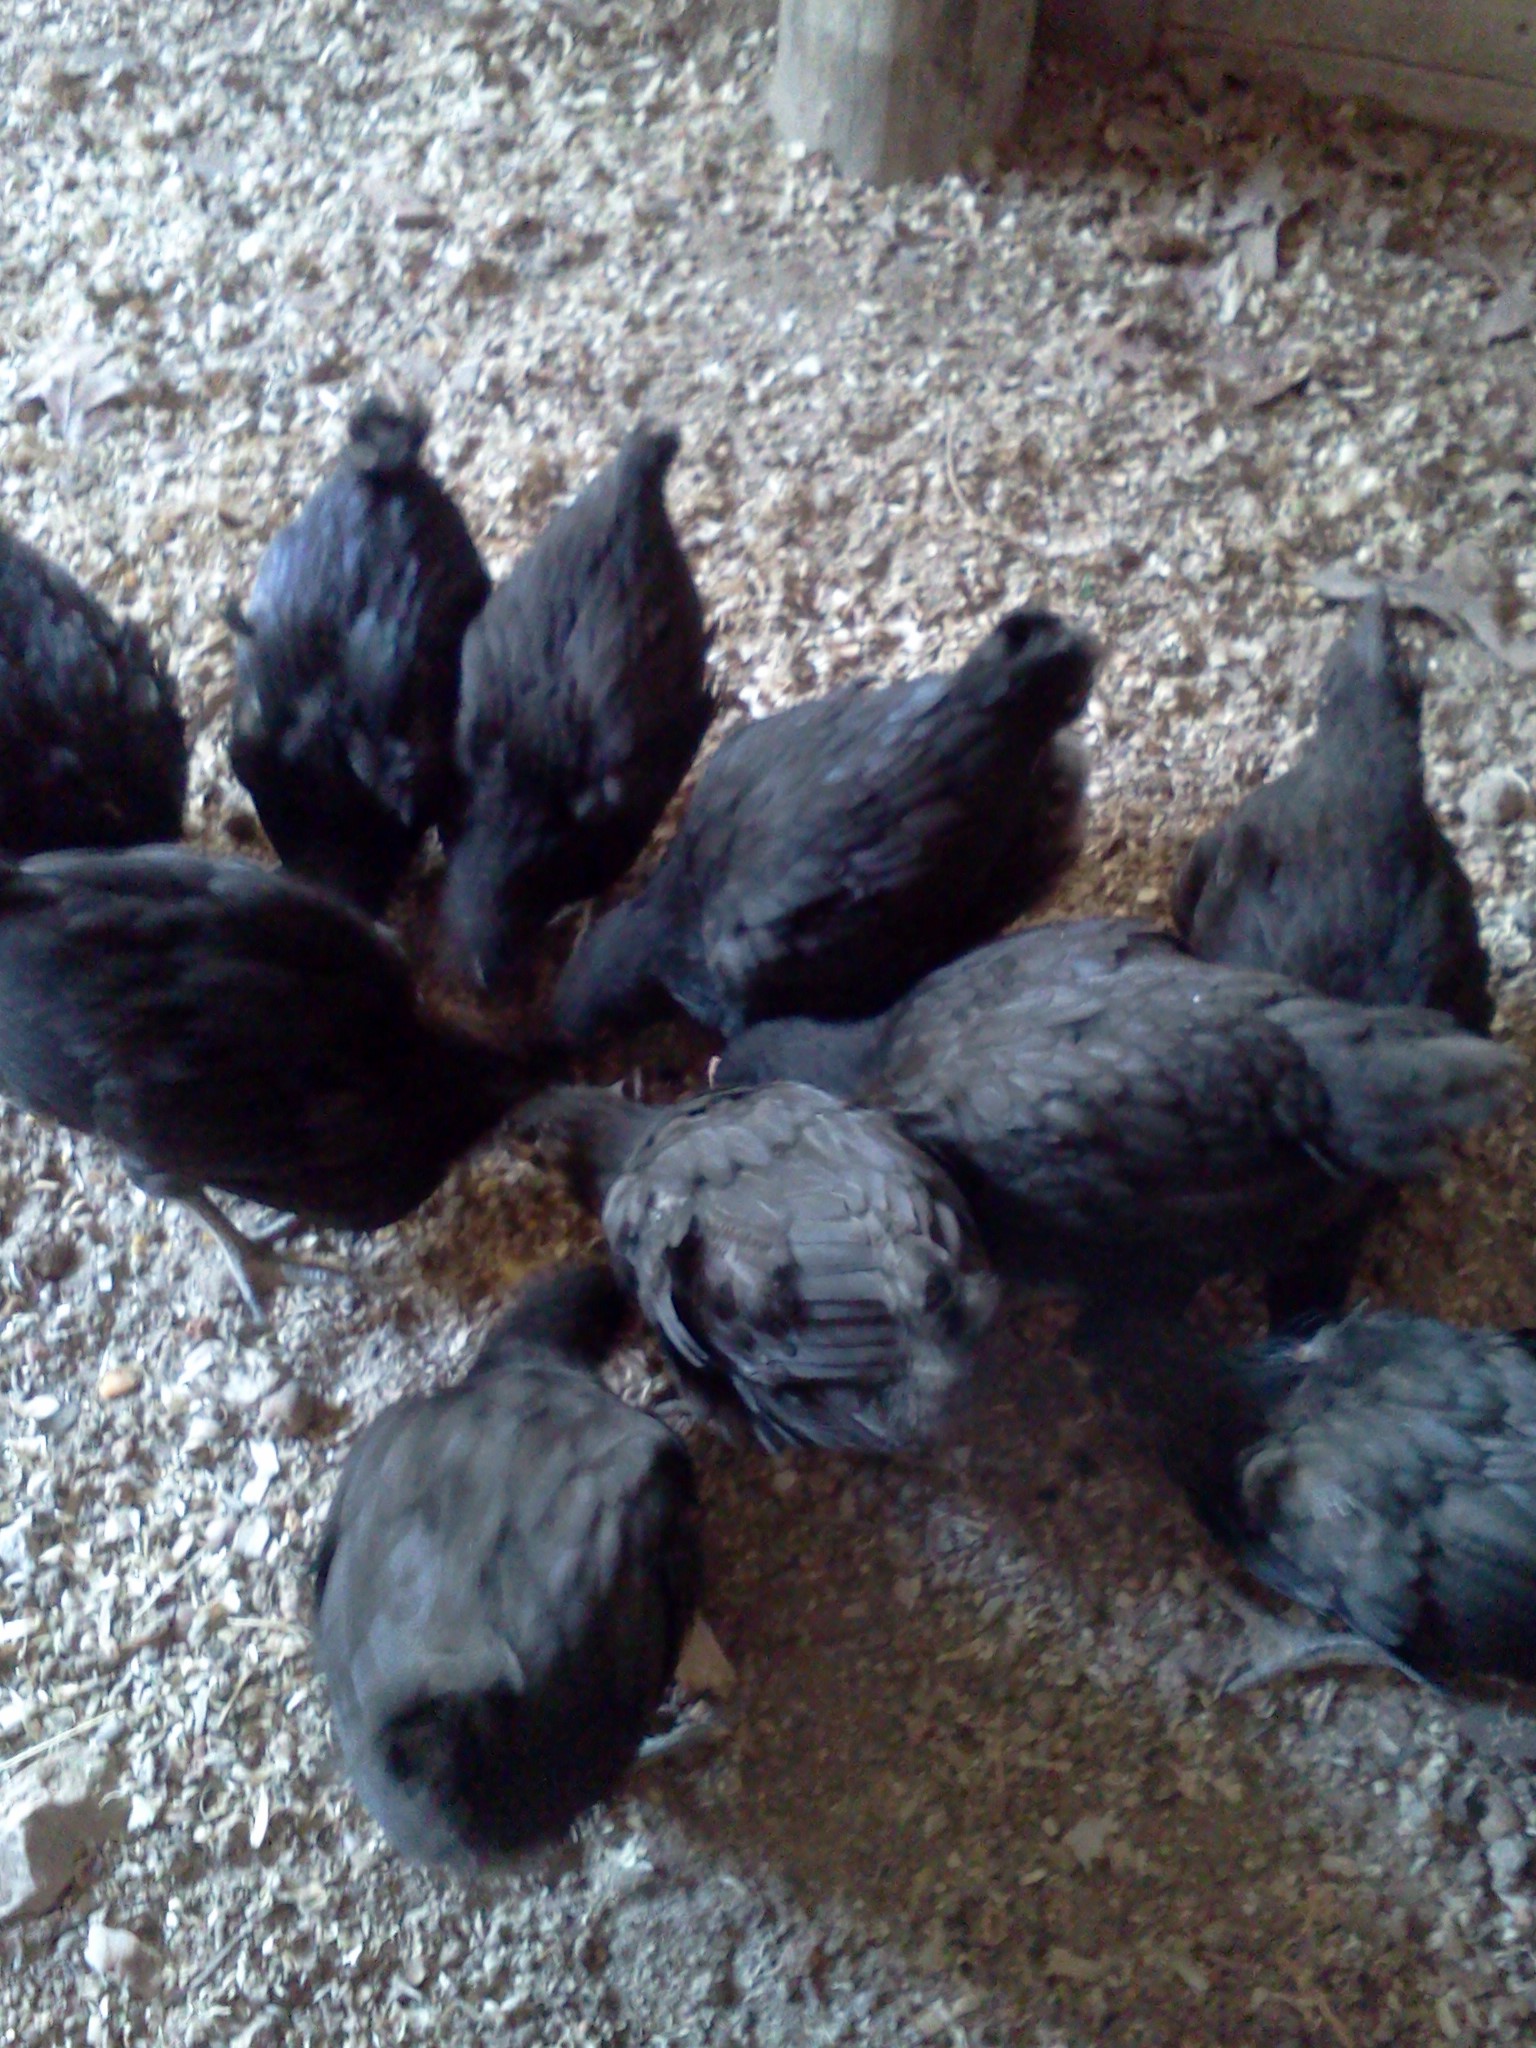 Diggine or eating their way to china.... or so it would seem... handful of grain and all you can see are 10 little butts up in the air and hear the peep peep, punk punk of their pecking in the dirt floor.